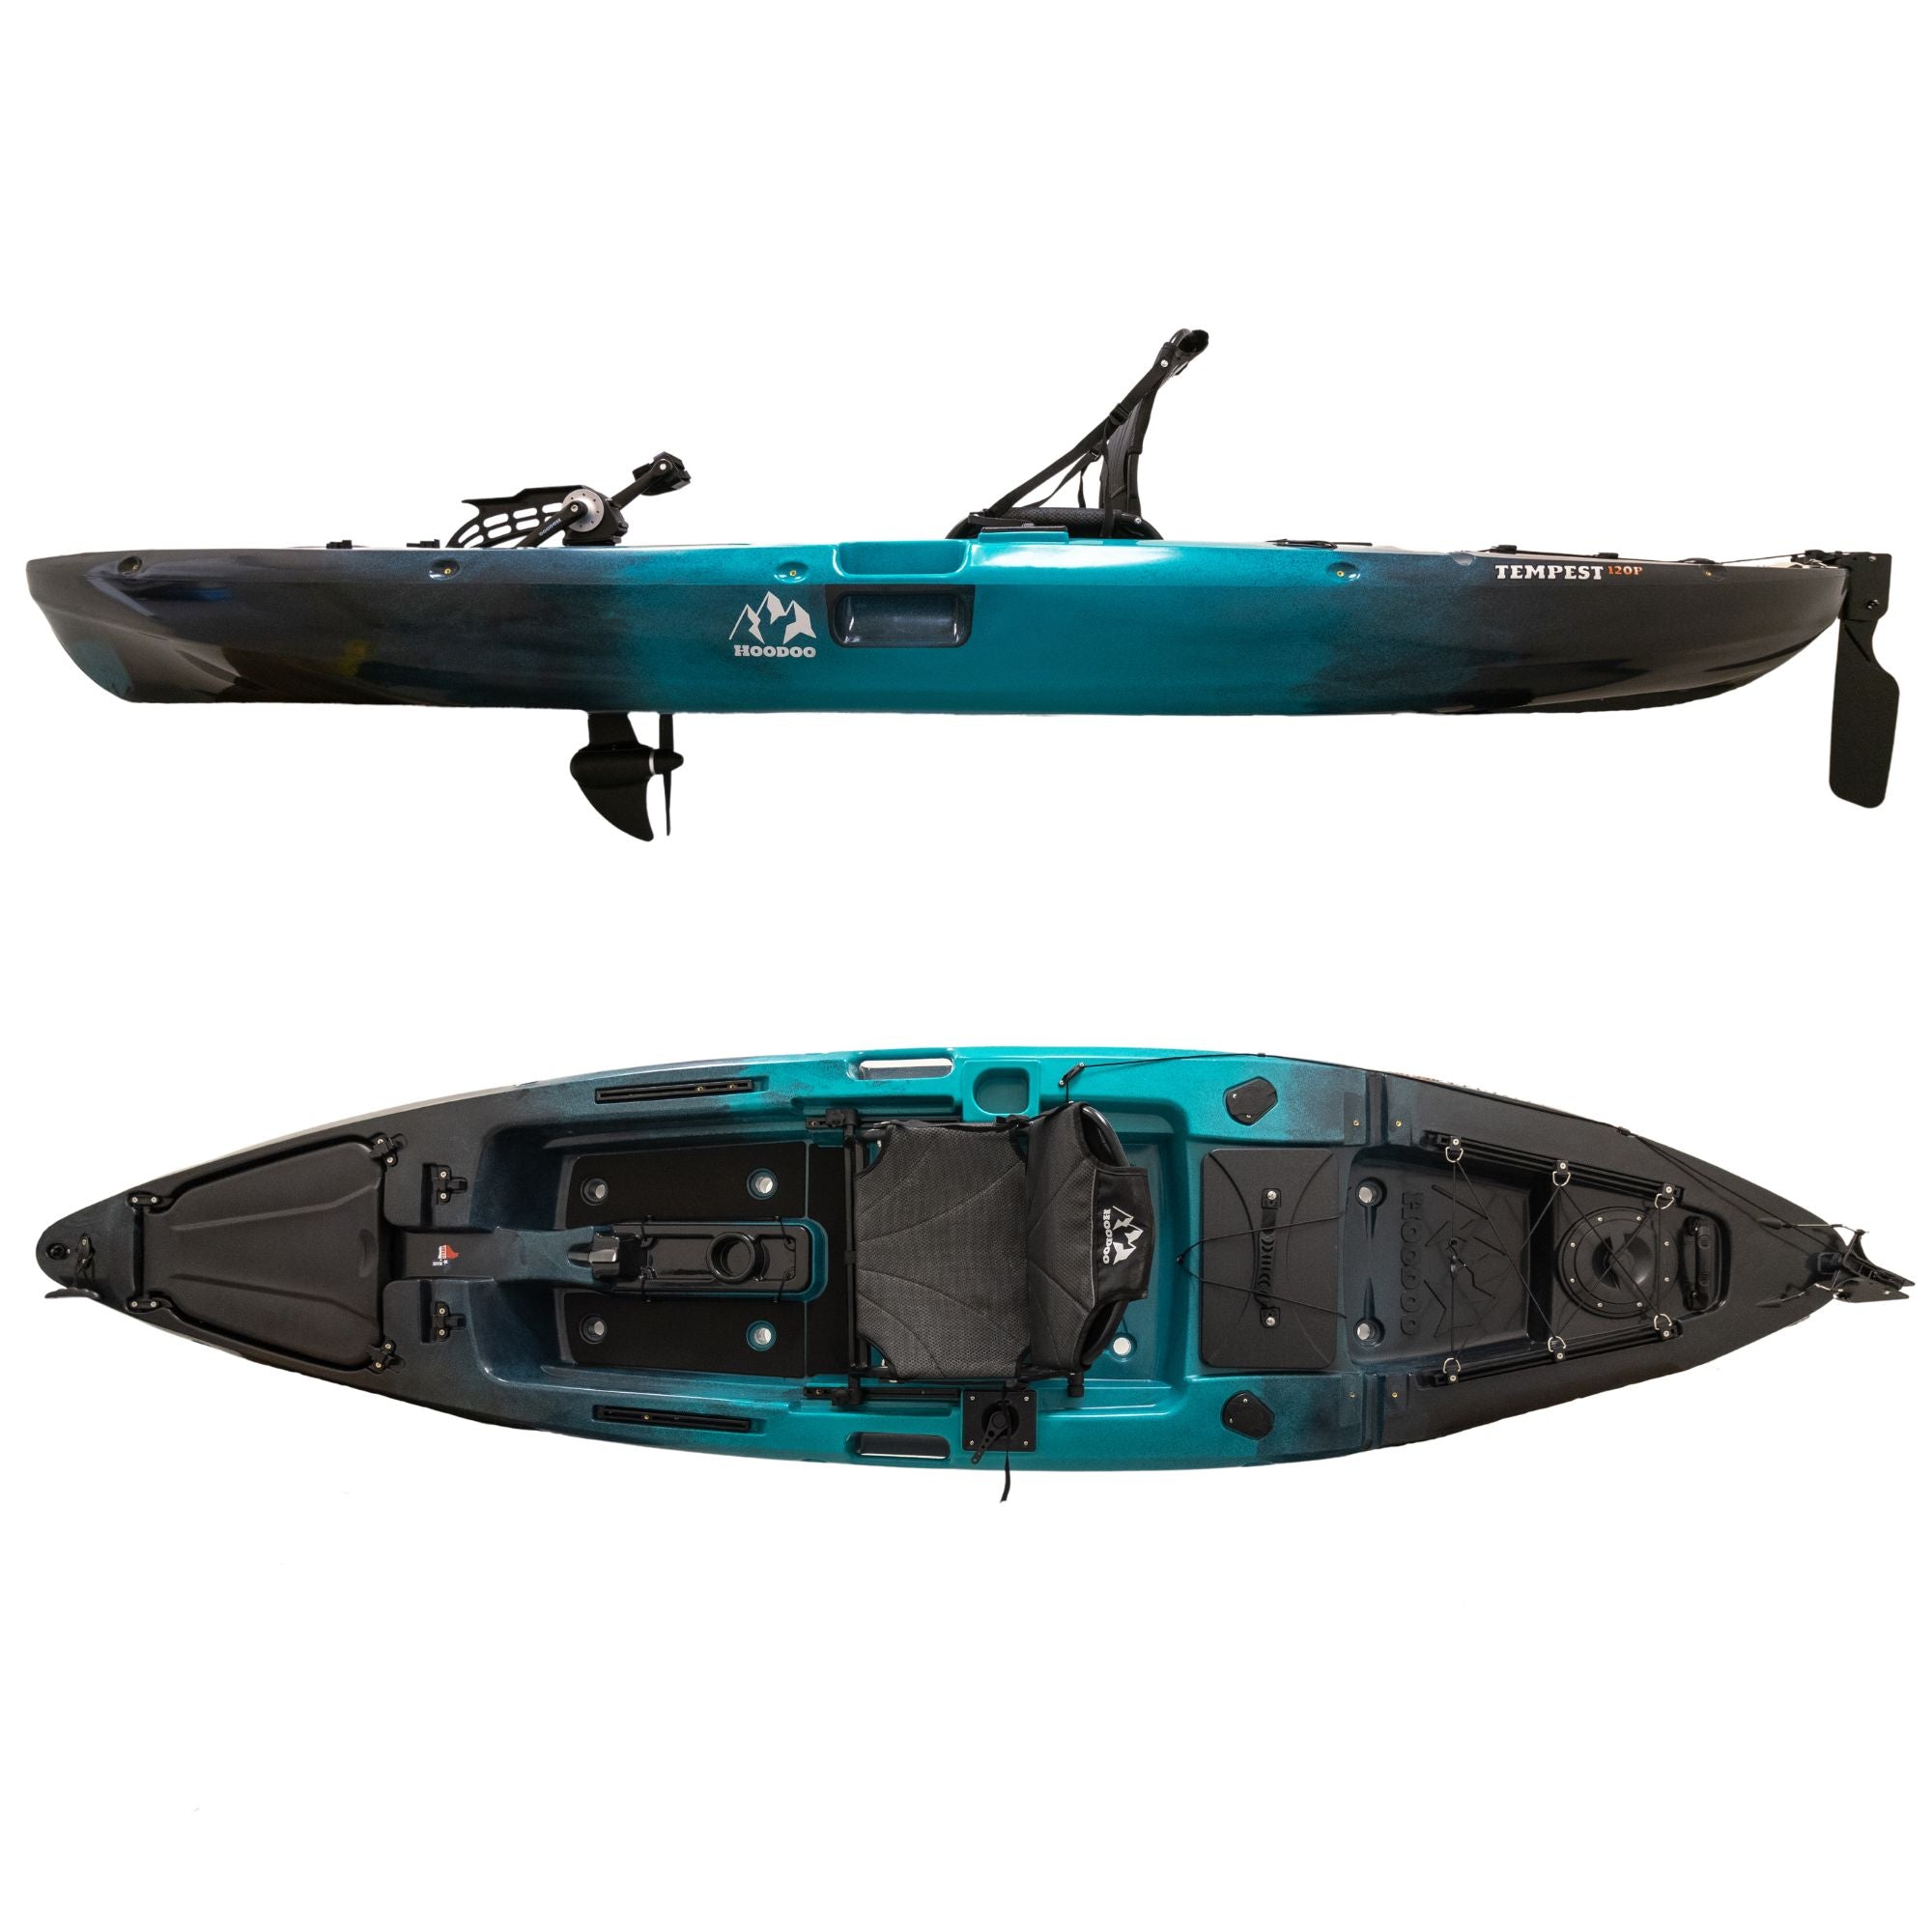 Hoodoo Tempest 120P, Pedal Drive Kayak, Made in Texas